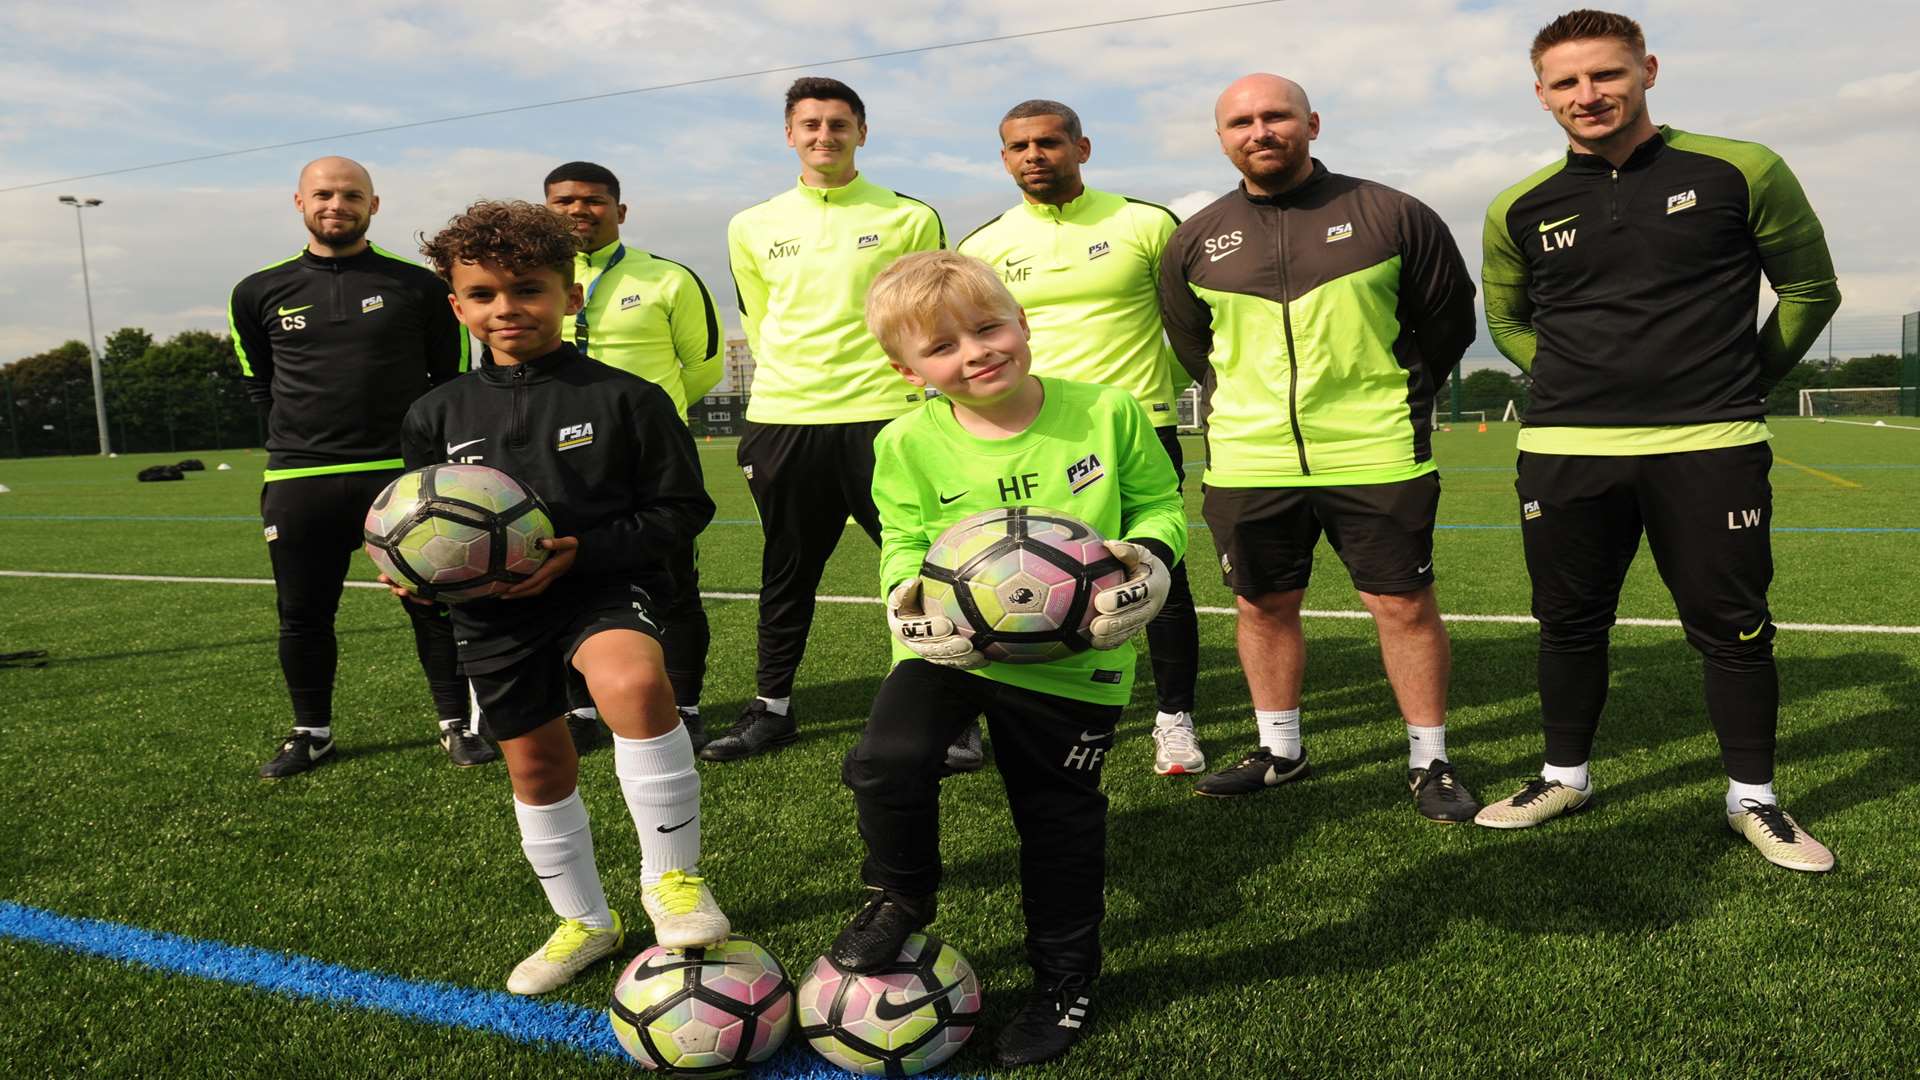 Pro Soccer coaches with youngsters at the Victory Academy Picture: Steve Crispe